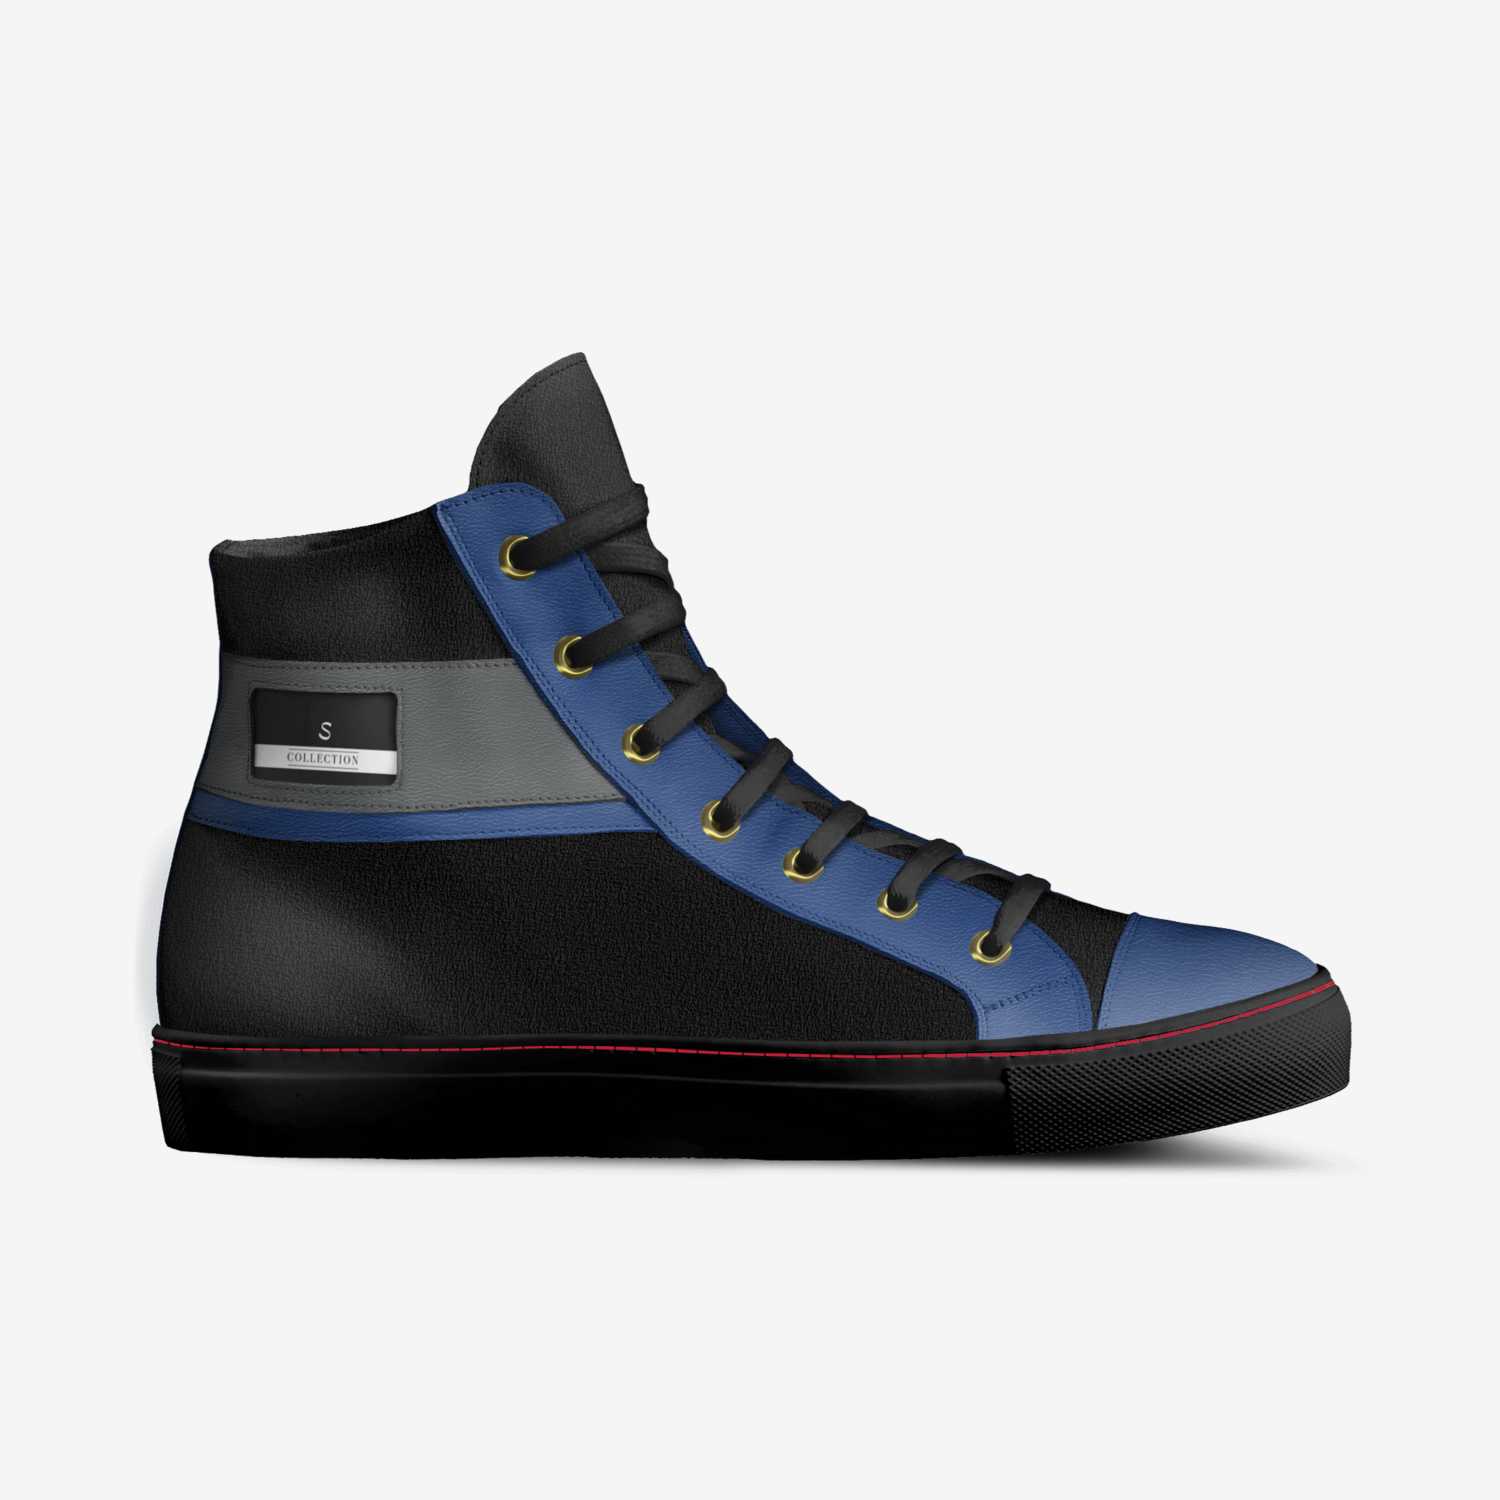 S custom made in Italy shoes by Richard K. Scott | Side view